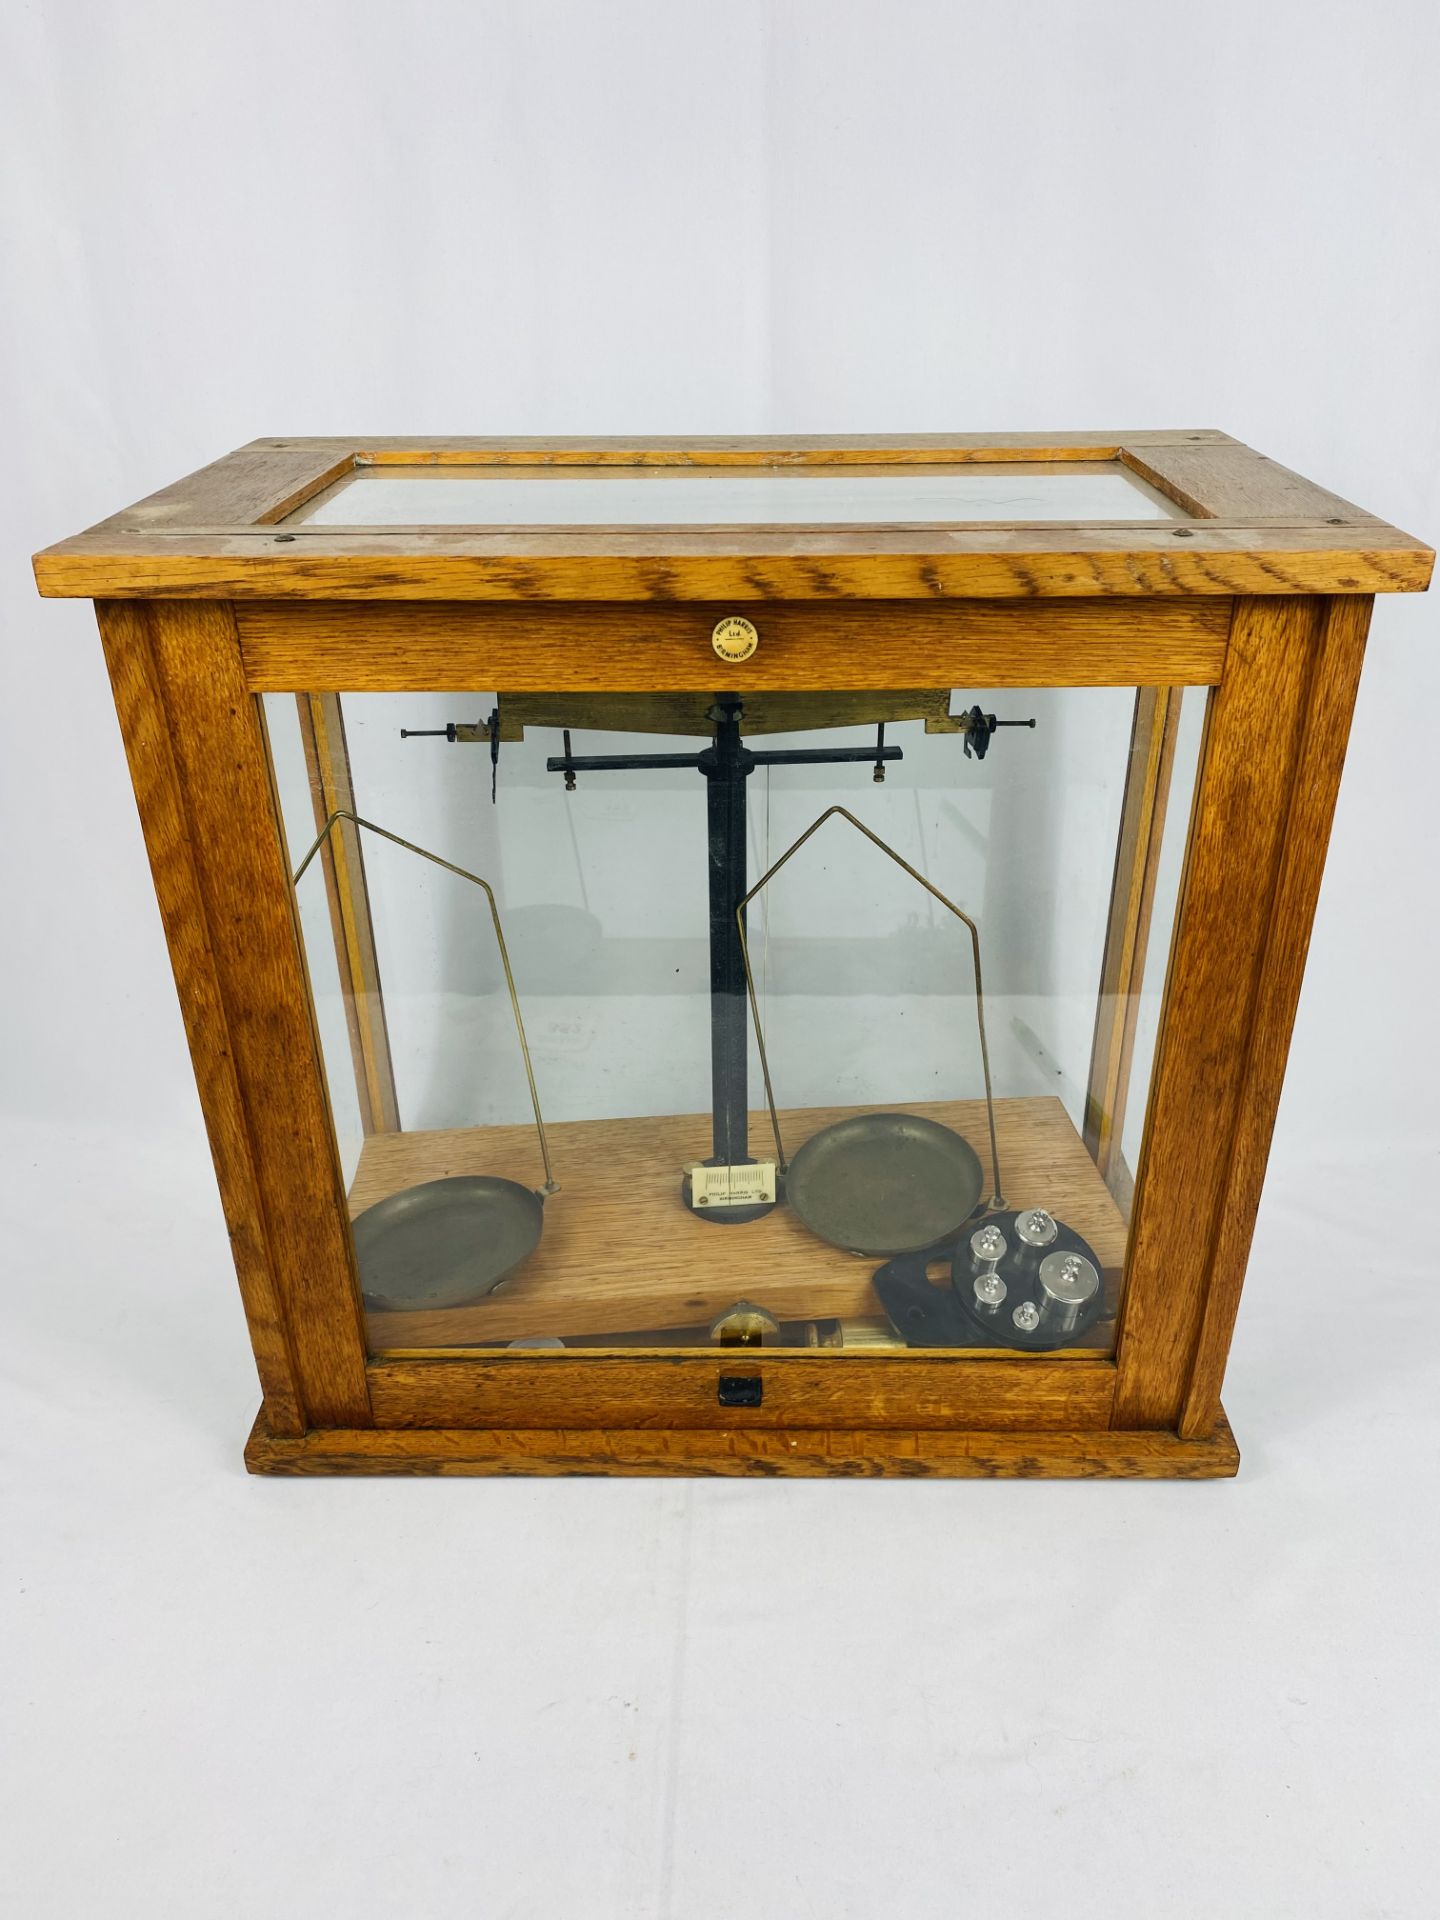 A set of balance scales by Philip Harris of Birmingham - Image 4 of 4